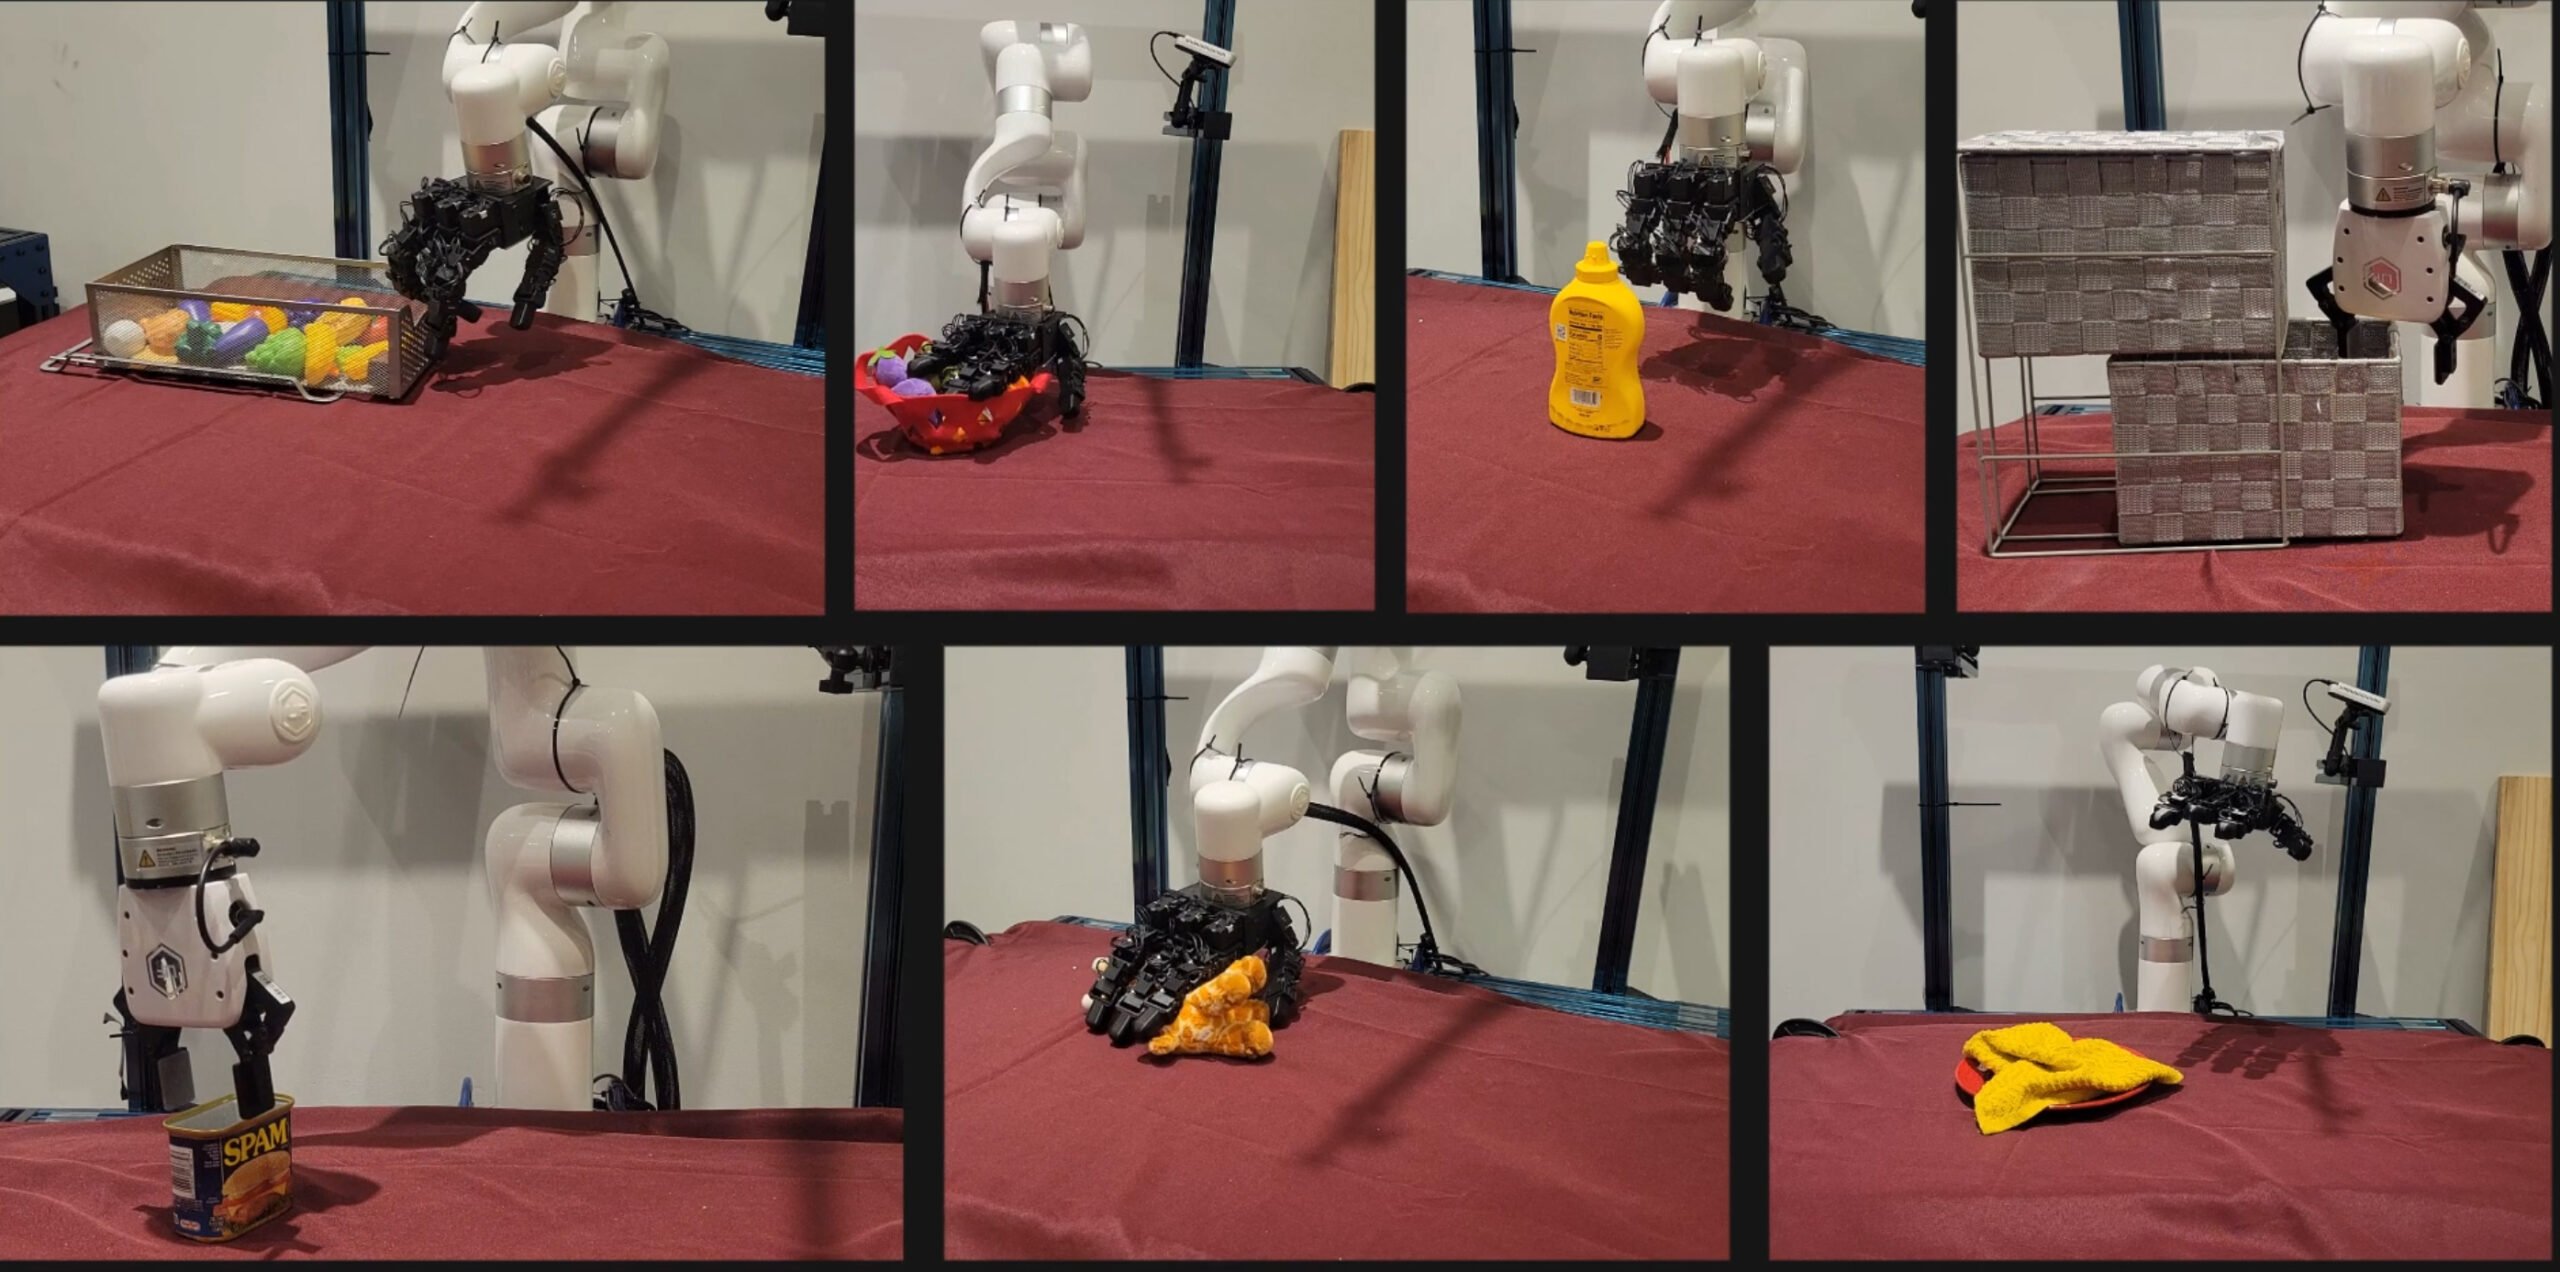 Video training for roboter hand allows it to learn human movements